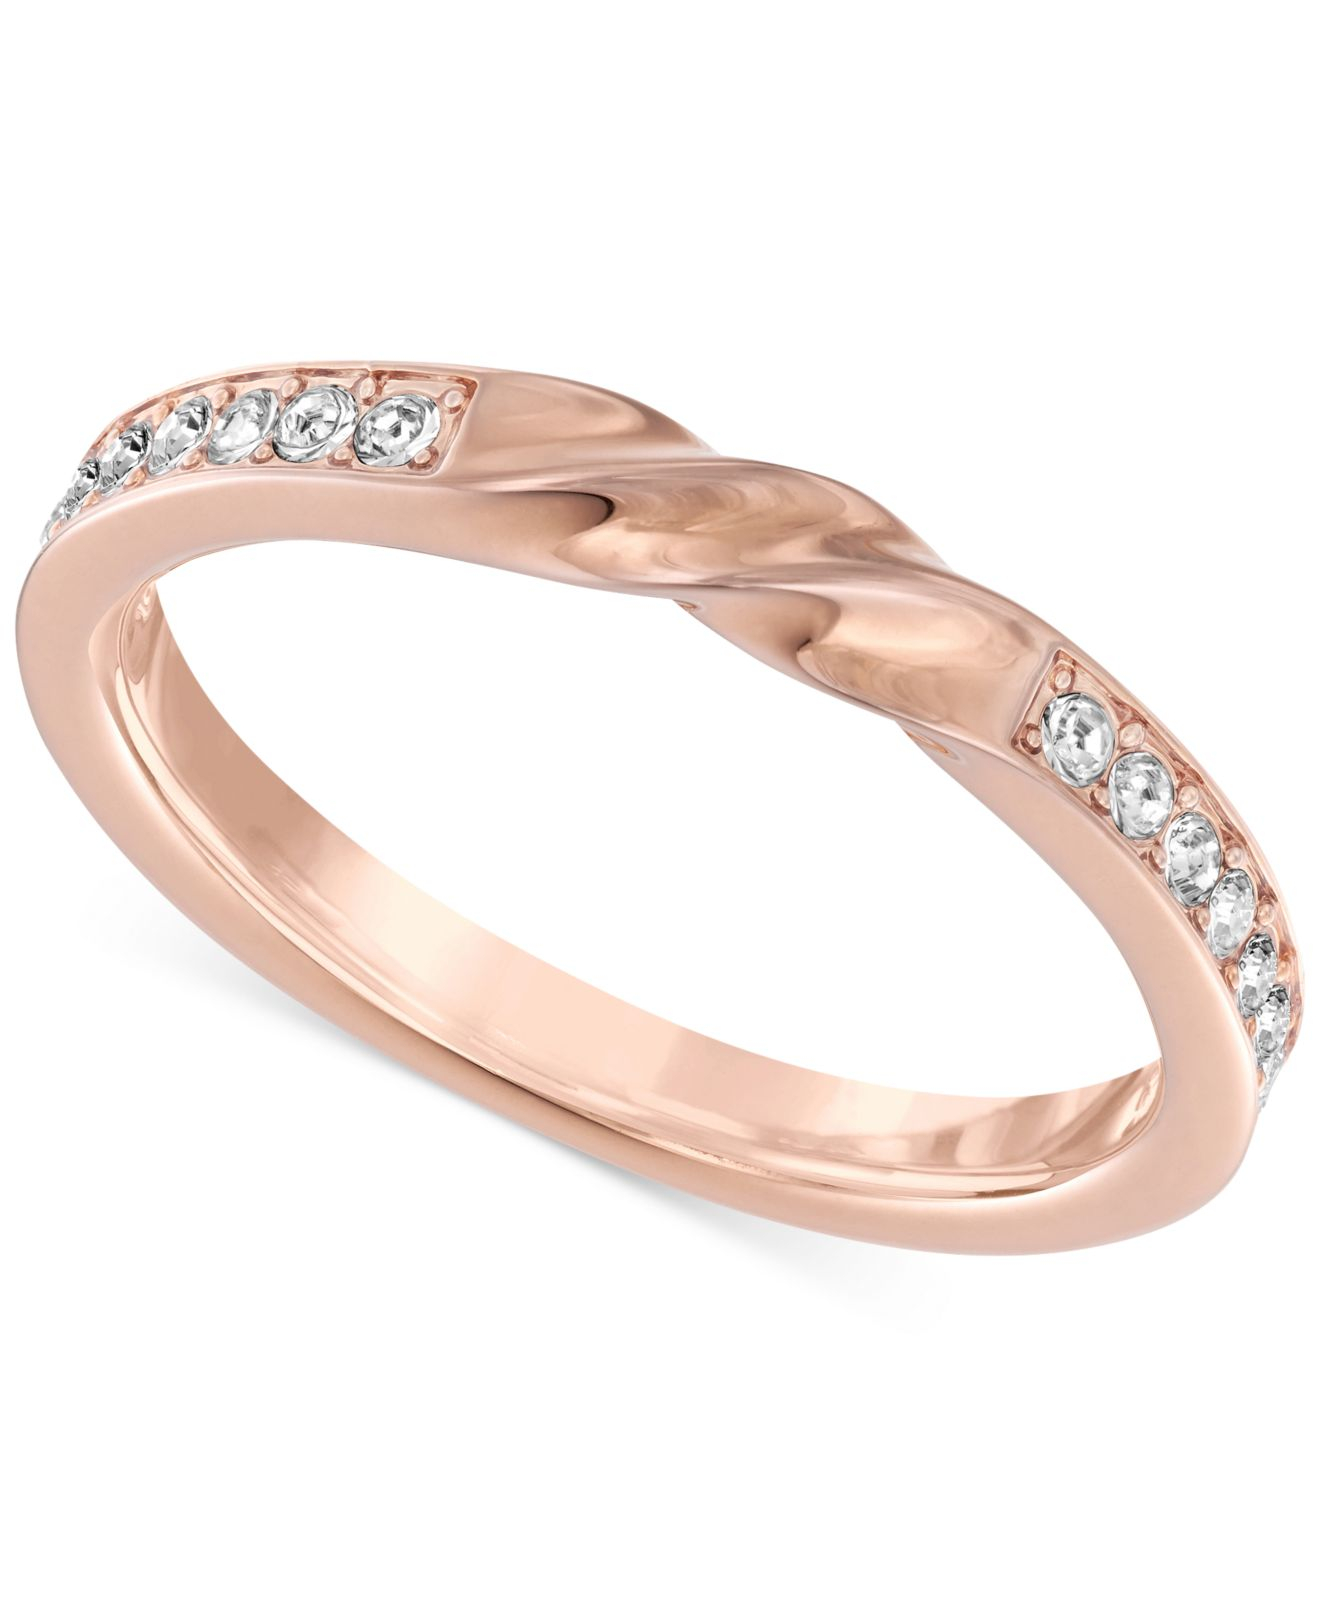 Lyst - Swarovski Curly Gold-tone Crystal Ring in Pink